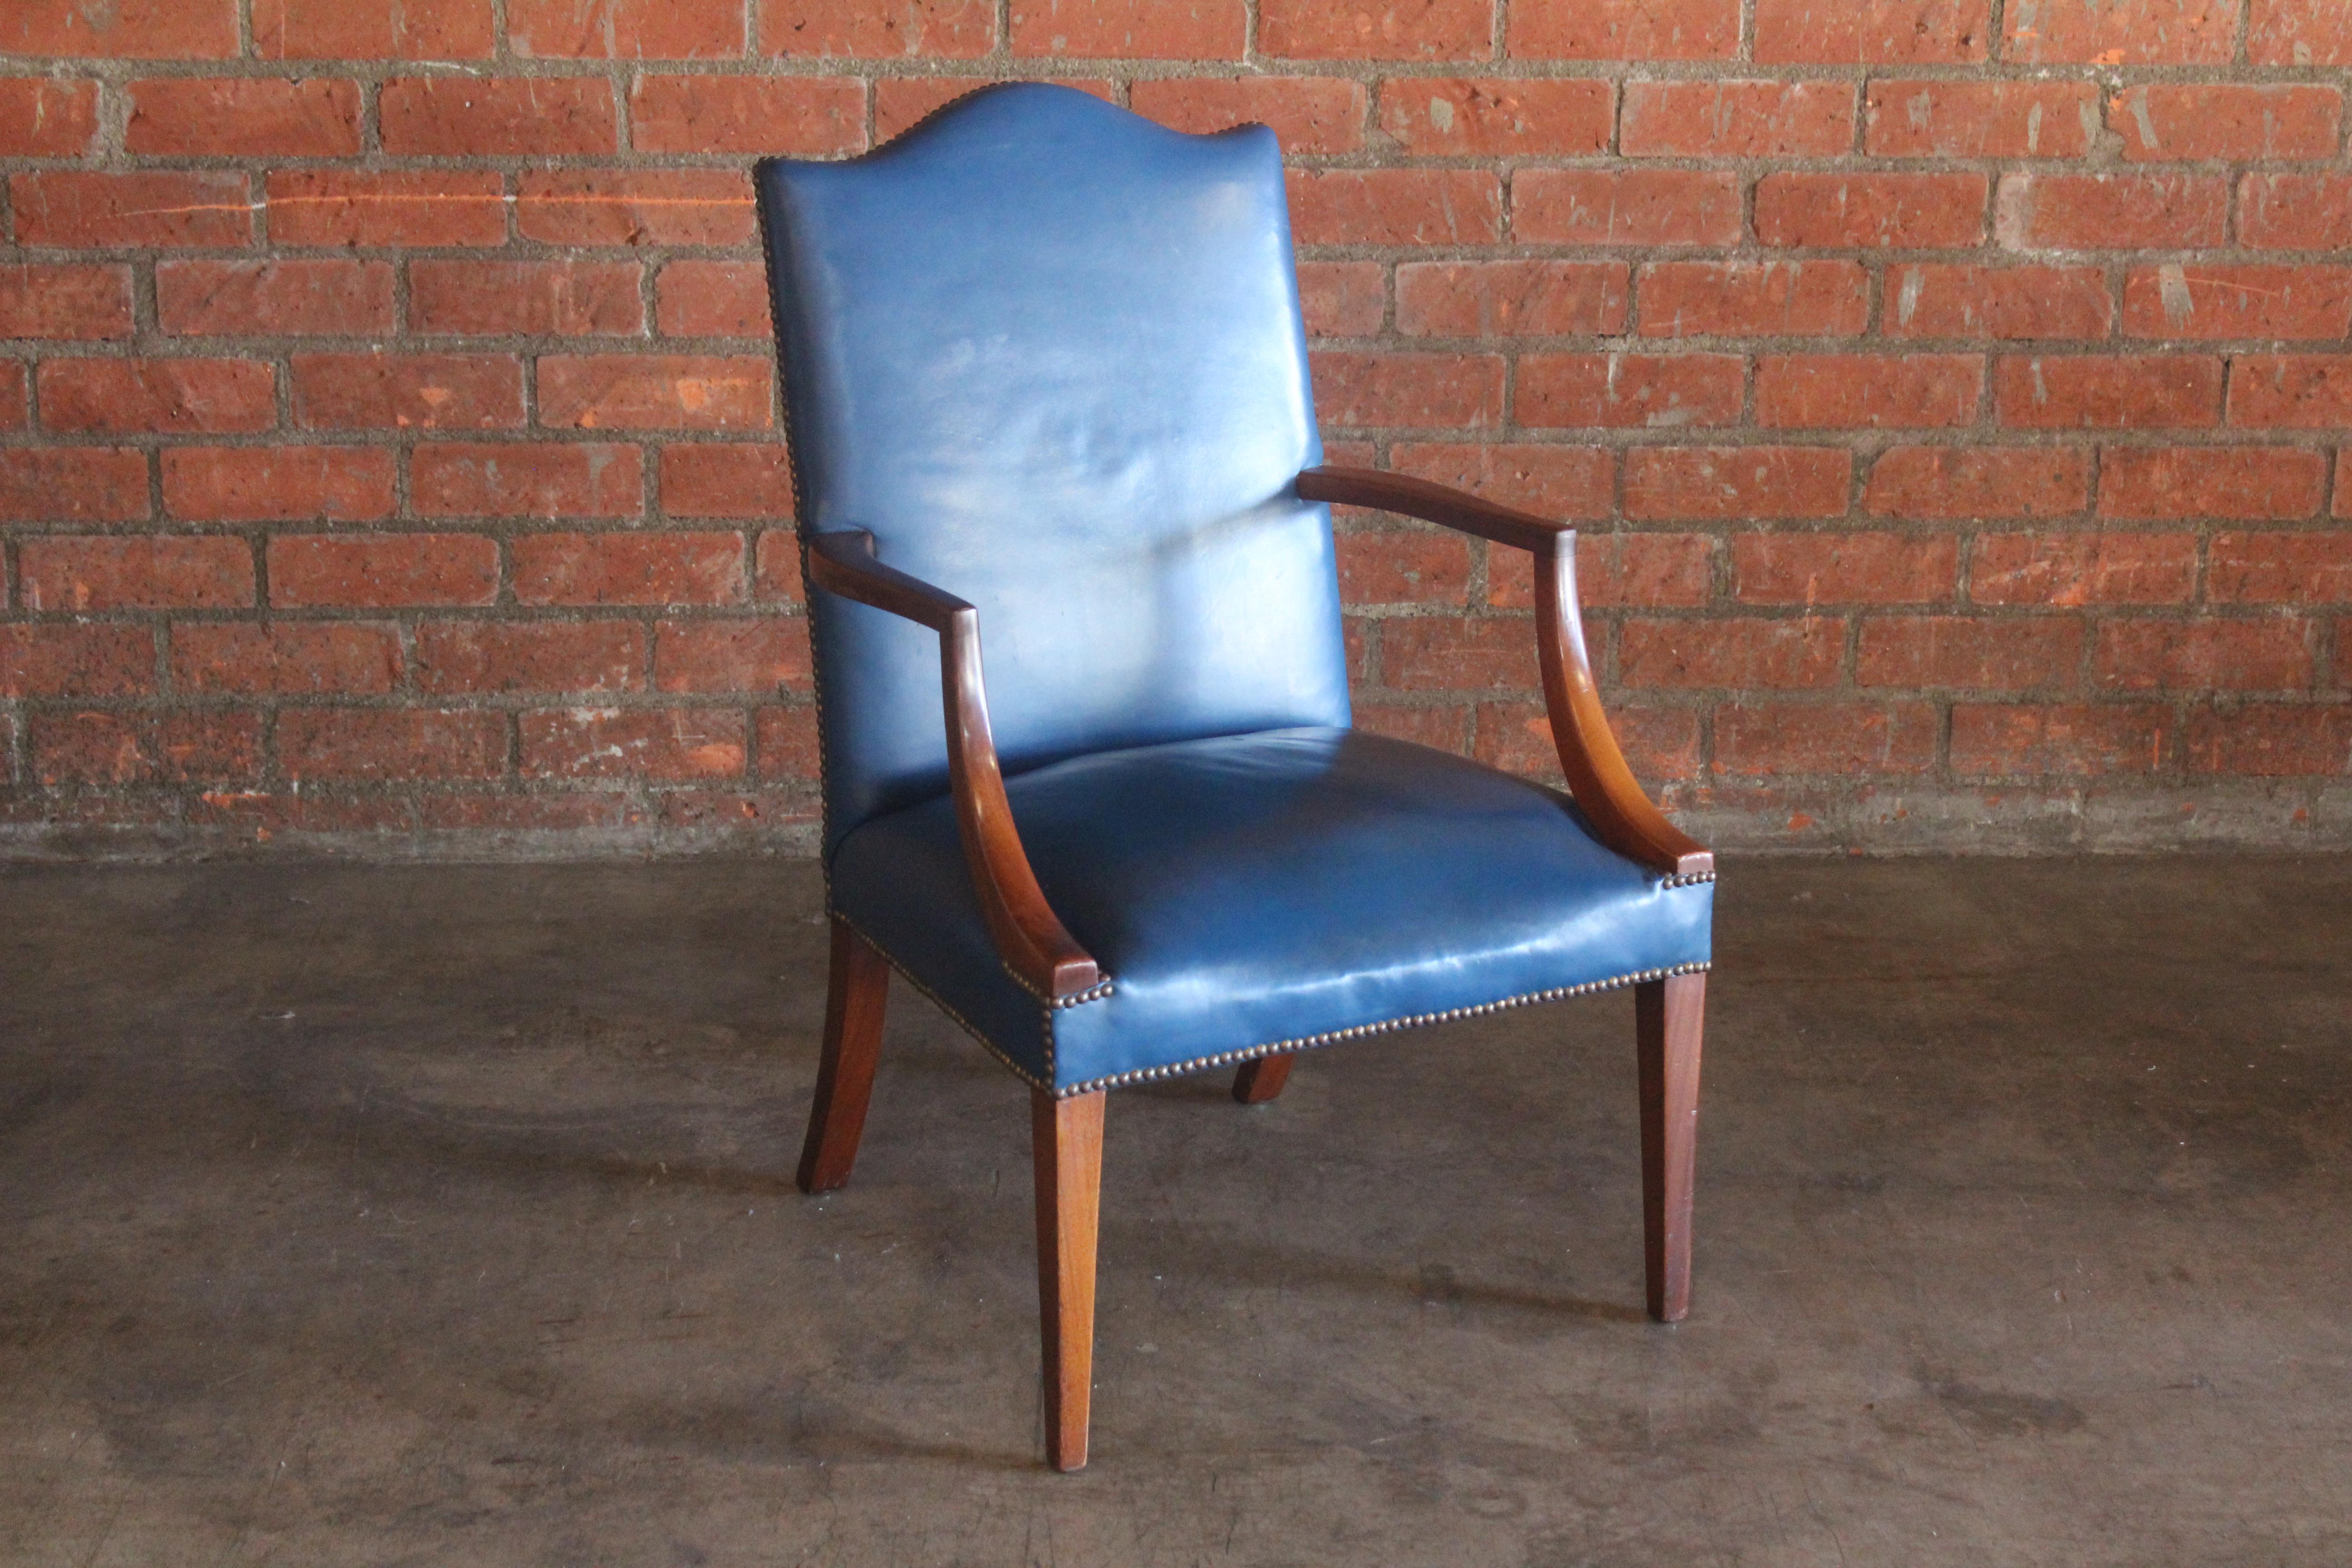 A vintage 1920s George II style armchair in mahogany and blue leather. It was upholstered in 1975. Features brass nailheads. In good condition with some wear to both the leather and wood.